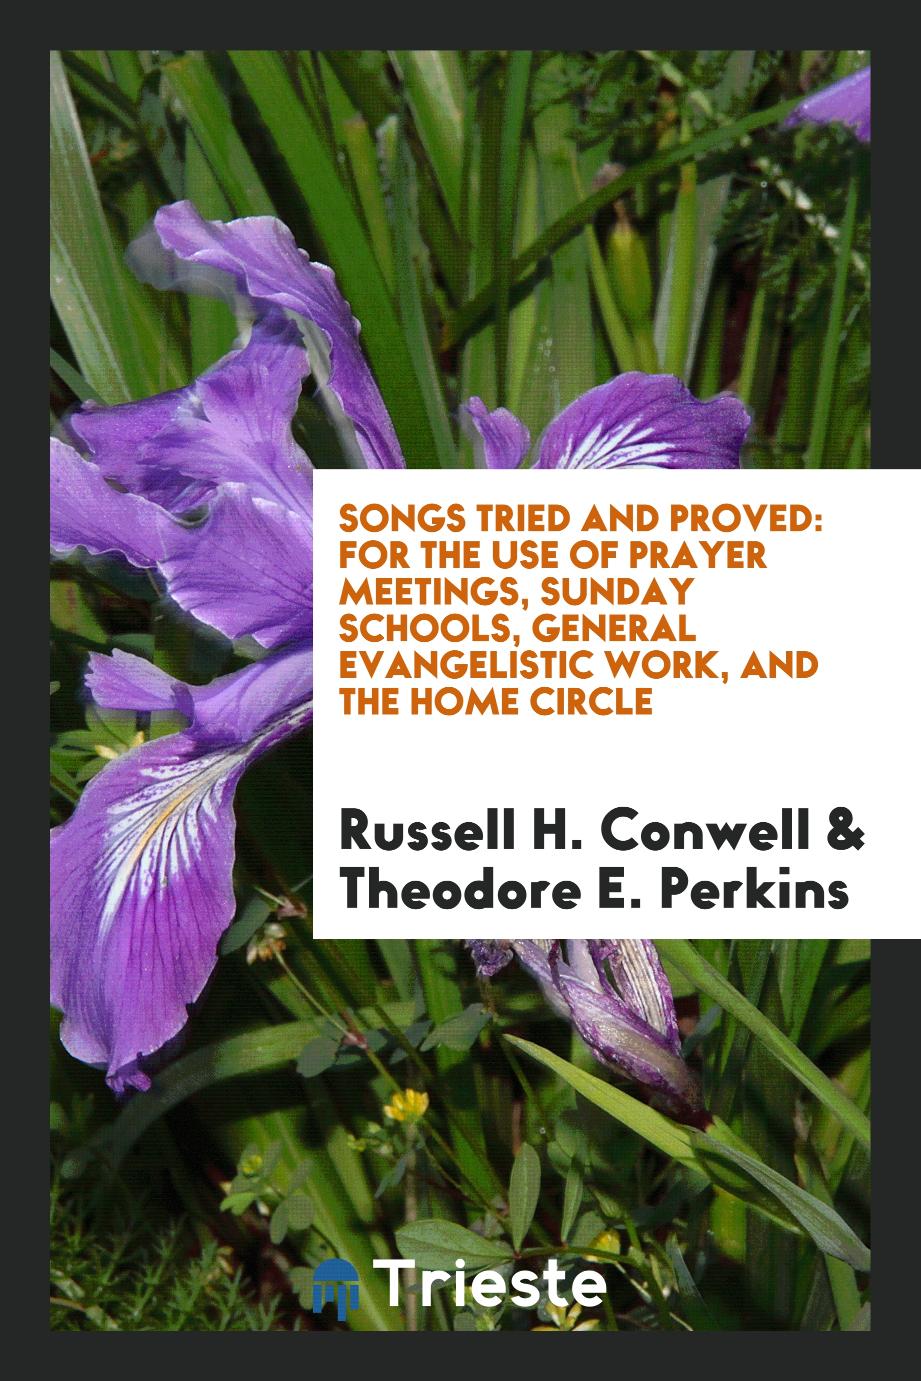 Songs Tried and Proved: For the Use of Prayer Meetings, Sunday Schools, General Evangelistic Work, and the Home Circle